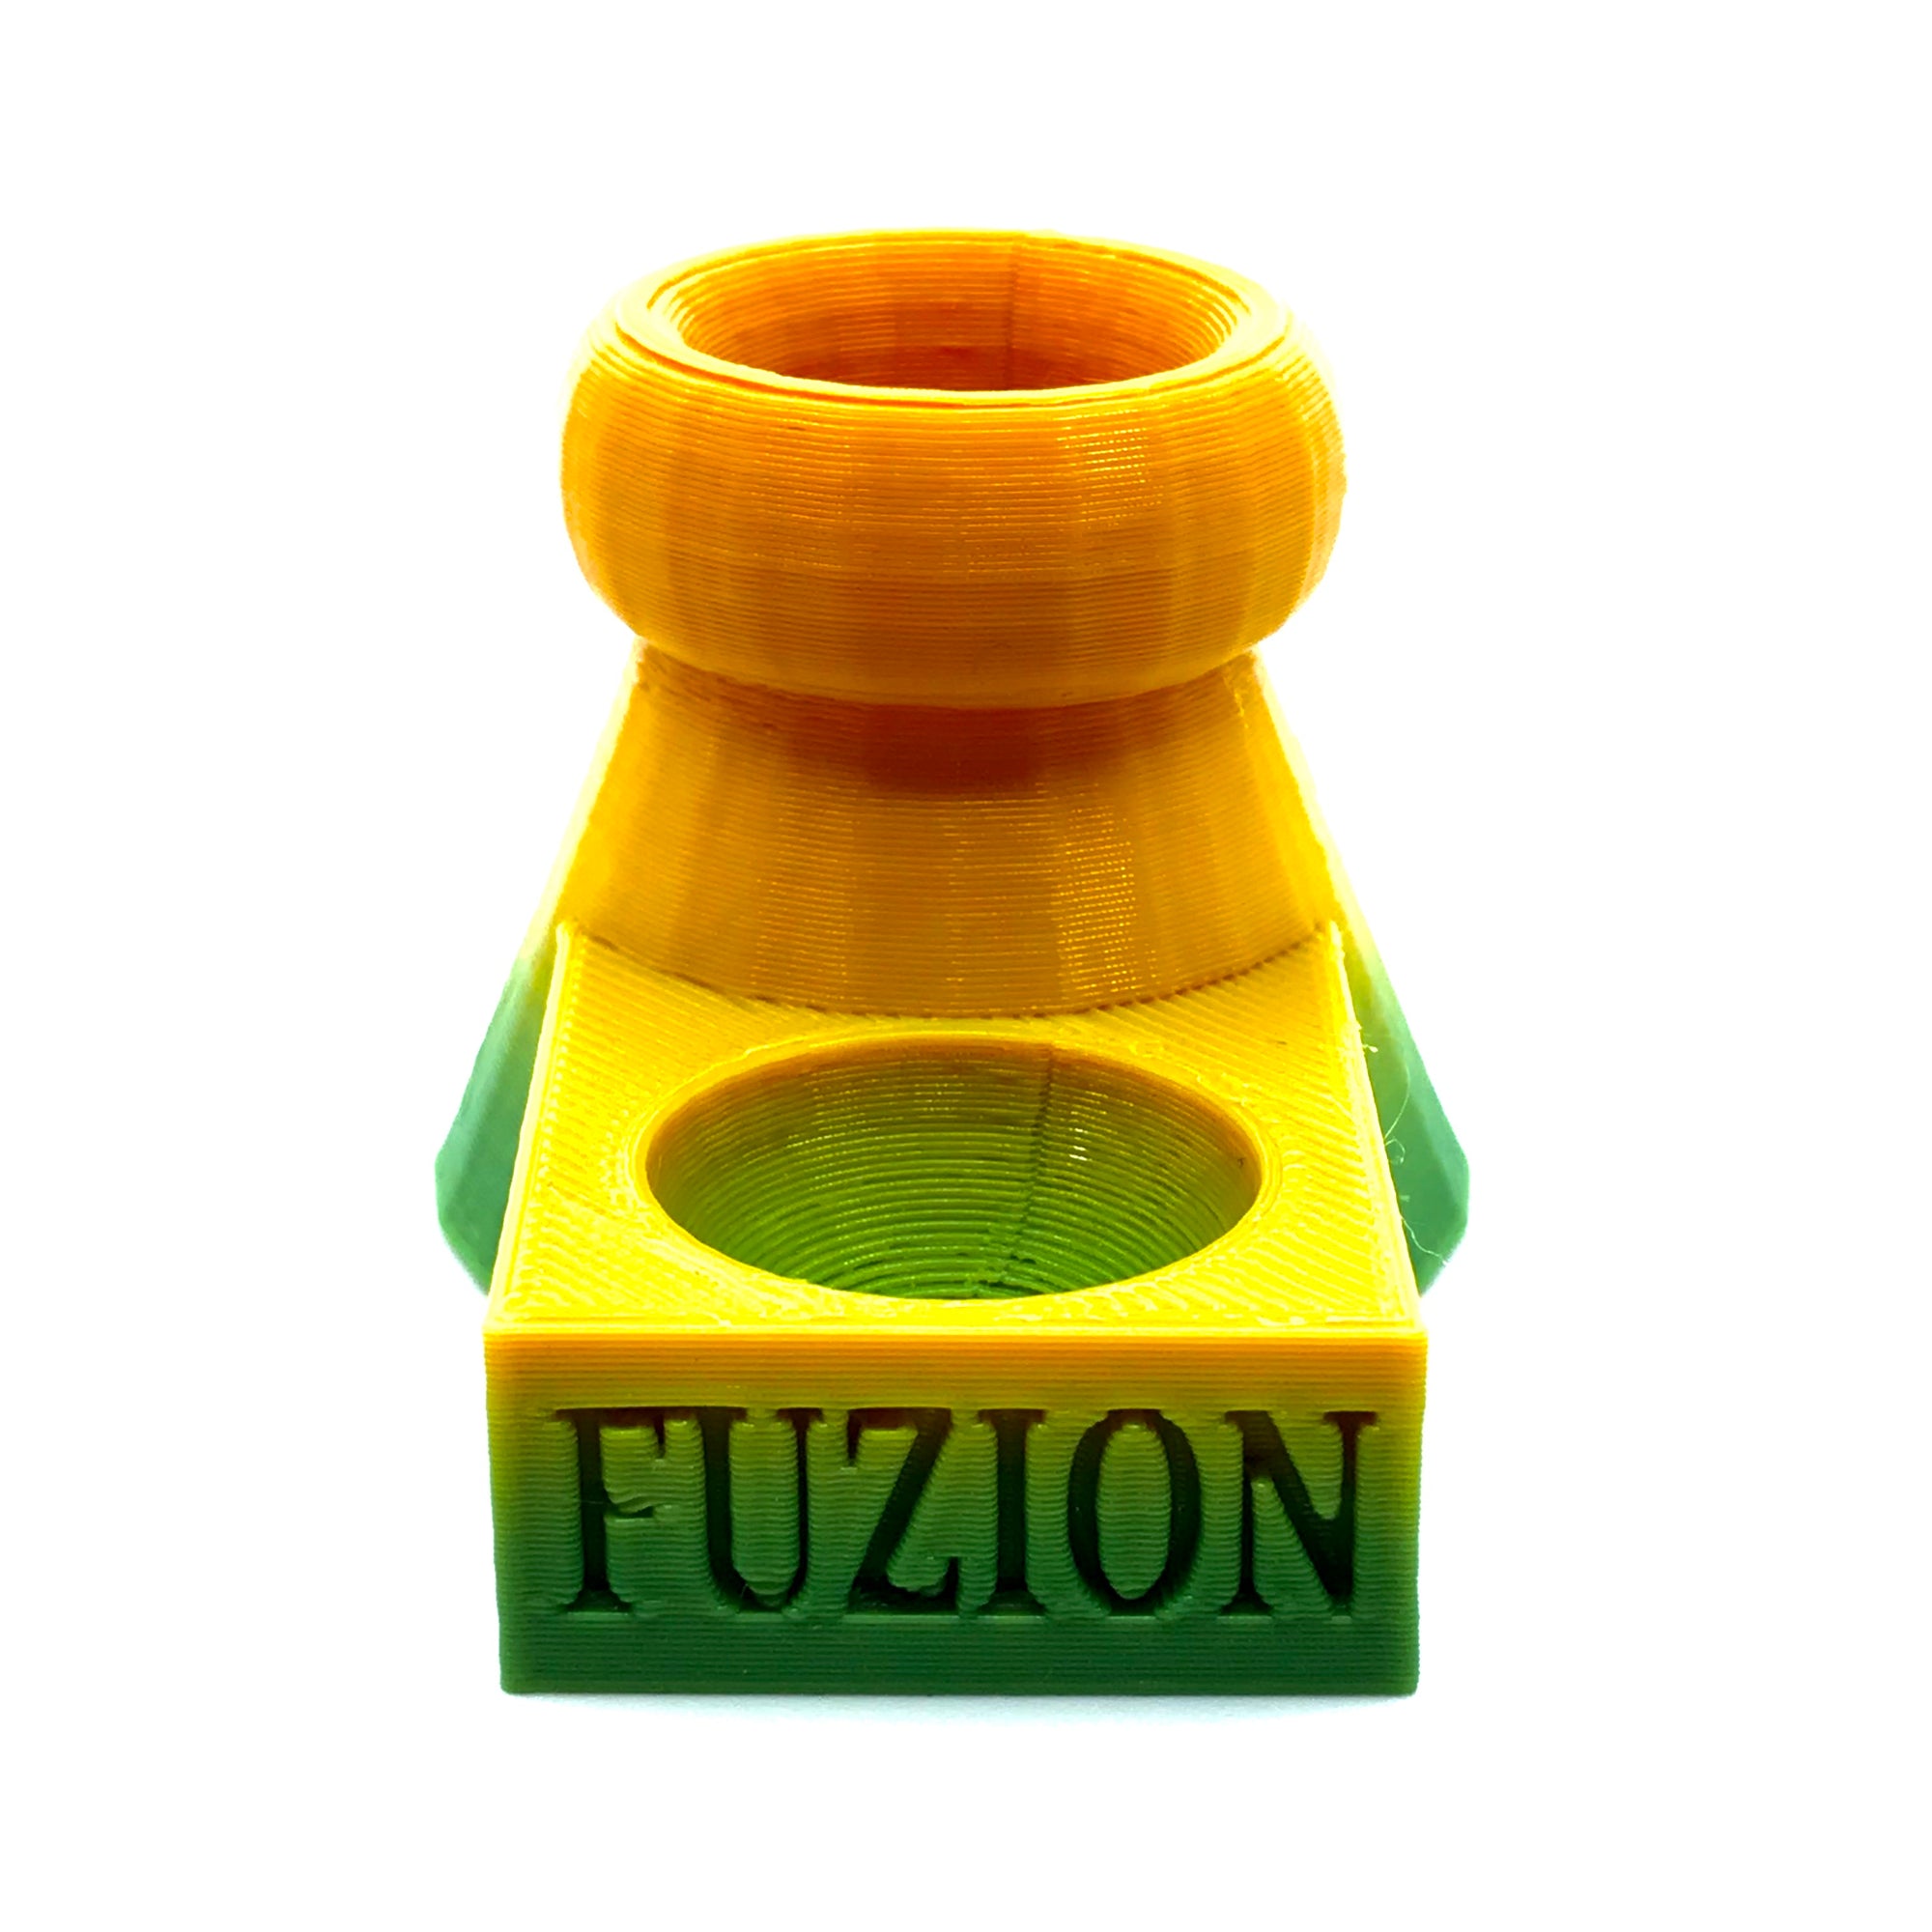 FUZION 3D Printed Bubble Cap and Terp Pearl Stand (Lemon Lime UV Reactive) show variants